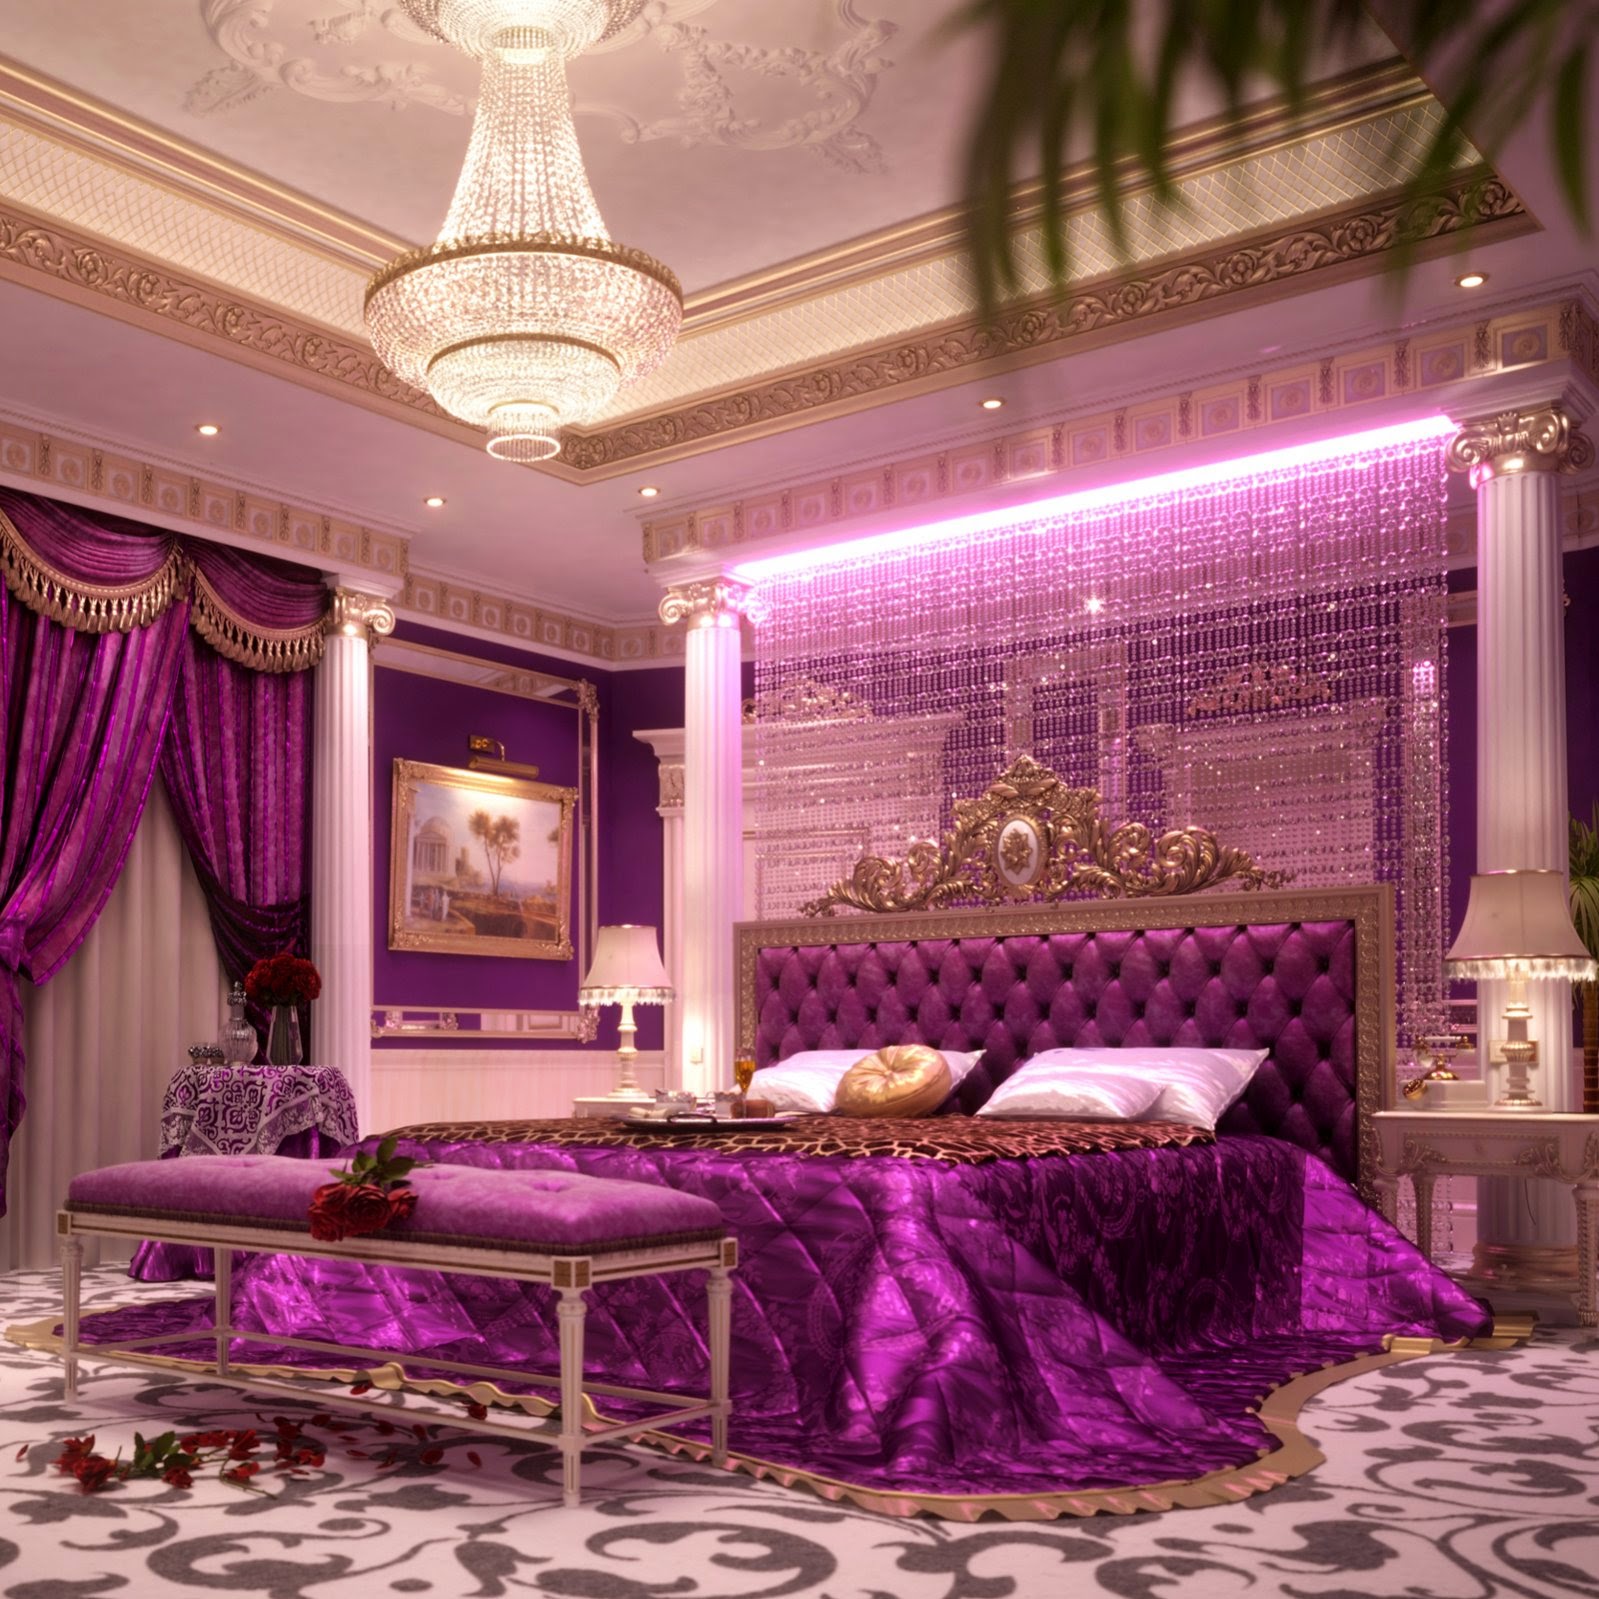 Free photo: Royal Bedroom - Architect, Images, Stock - Free Download